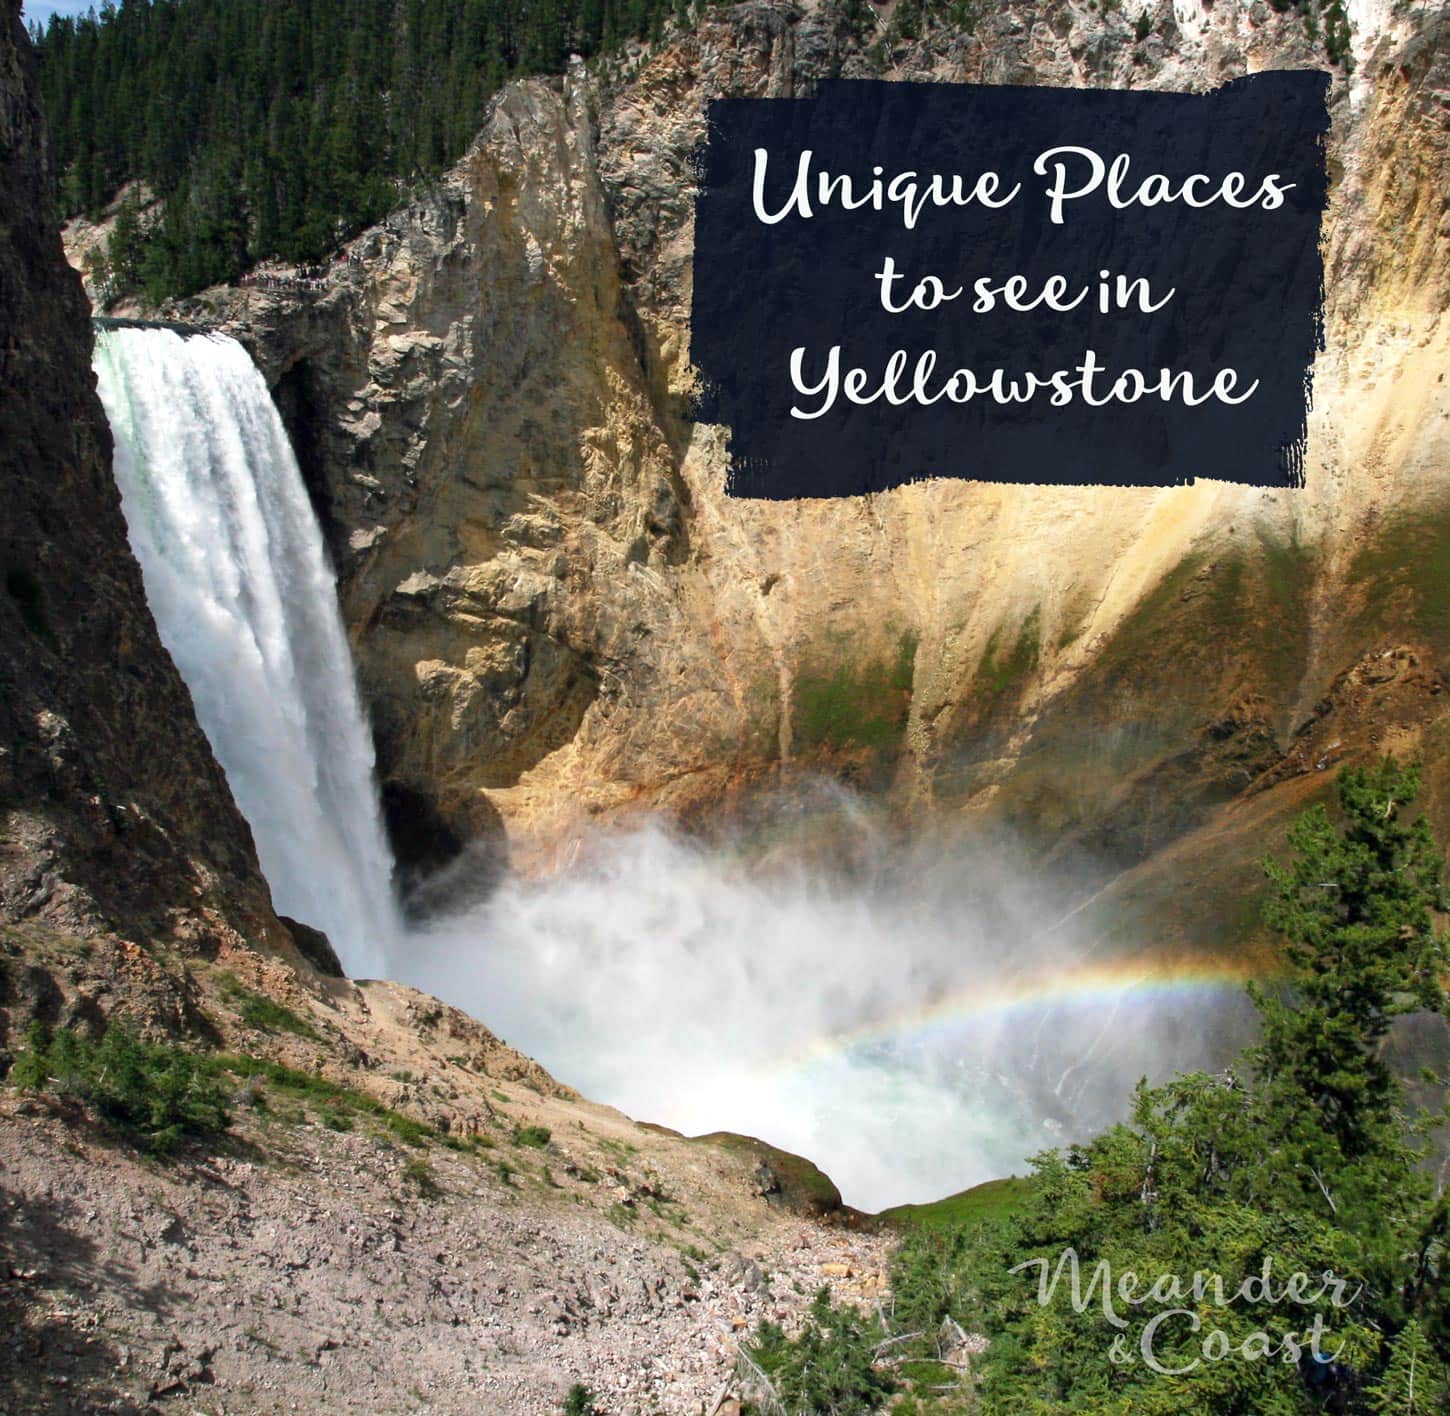 Off the beaten path, unique places to see in Yellowstone. | Yellowstone Attractions that aren't Old Faithful. Meander & Coast #yellowstone #nationalpark #yellowstoneattractions #thingstosee #wyoming